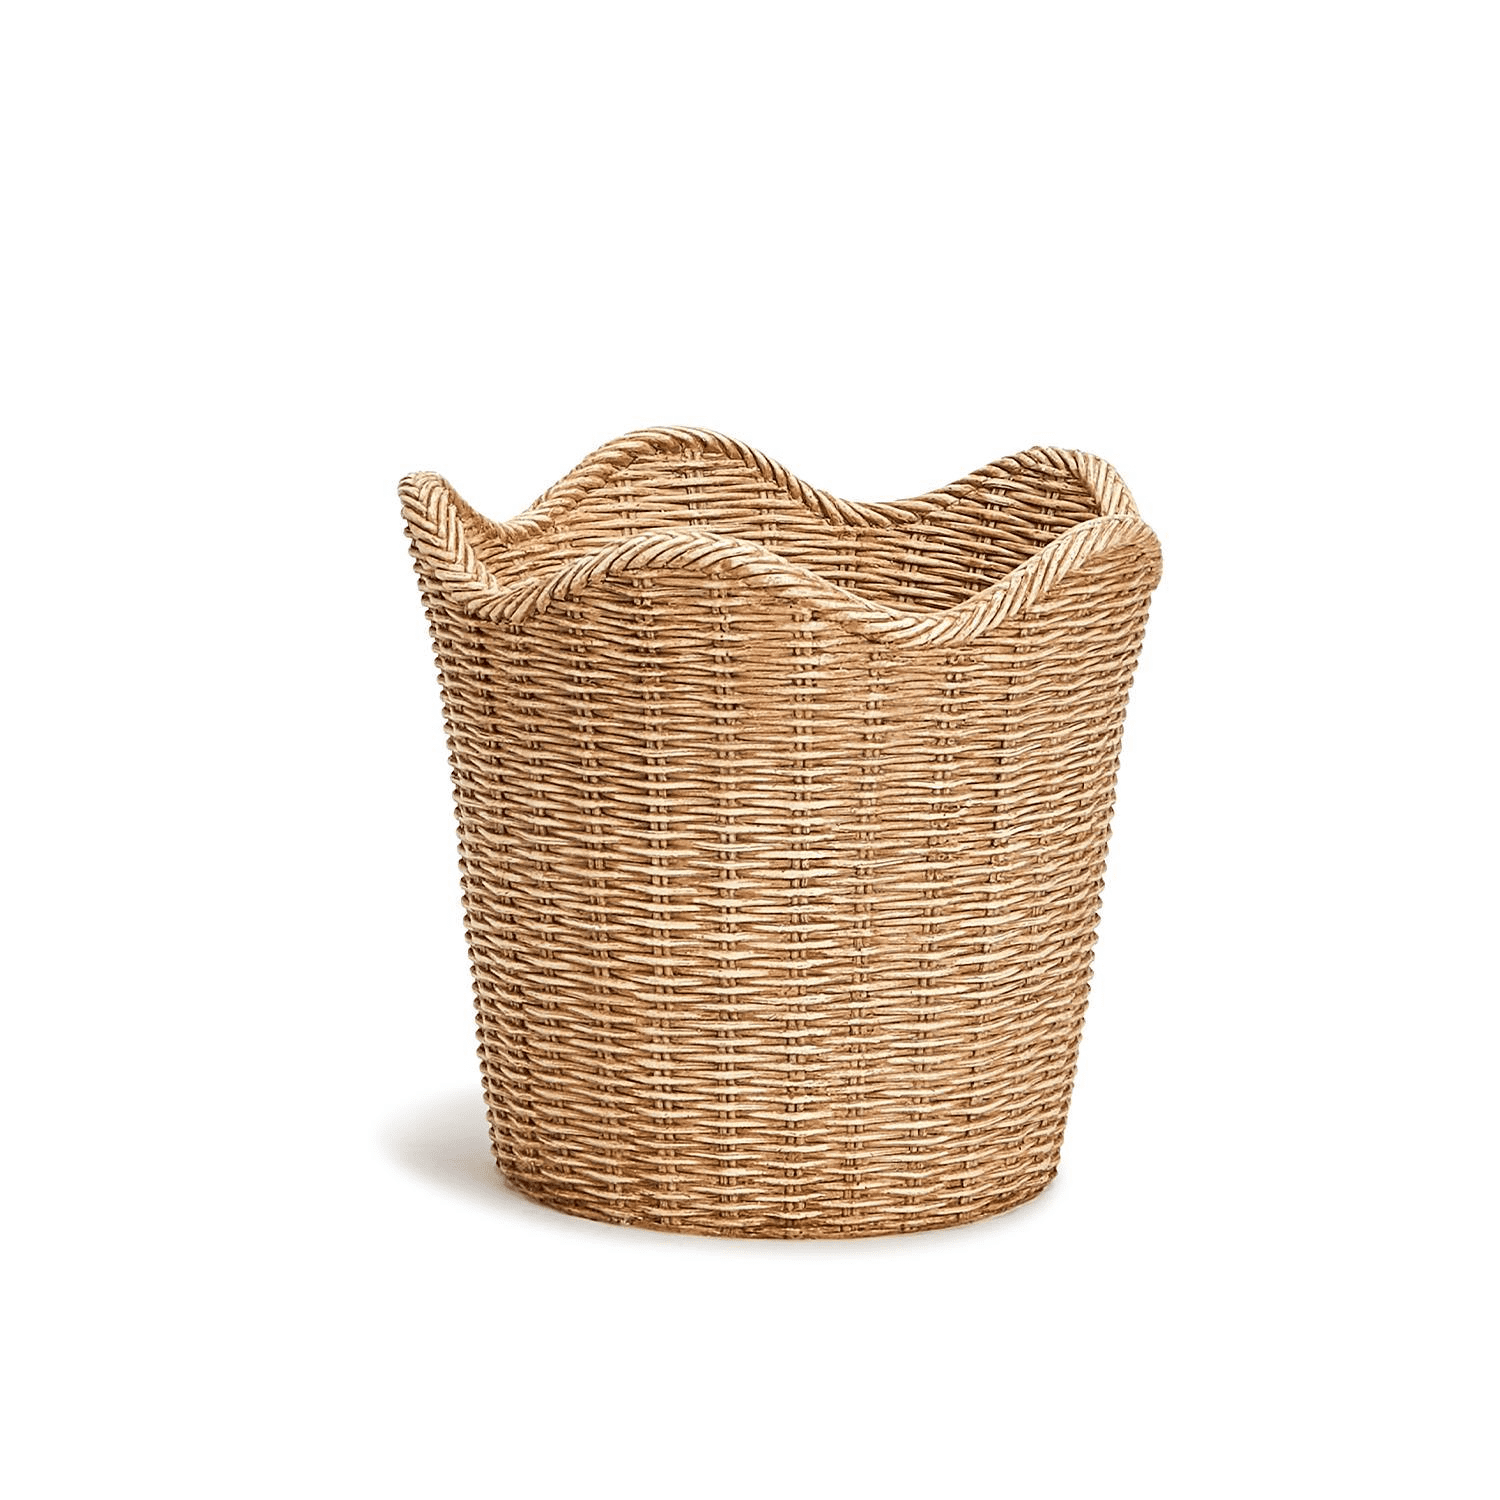 Basket Weave Scalloped Cachepot | Two's Company | Iris Gifts & Décor